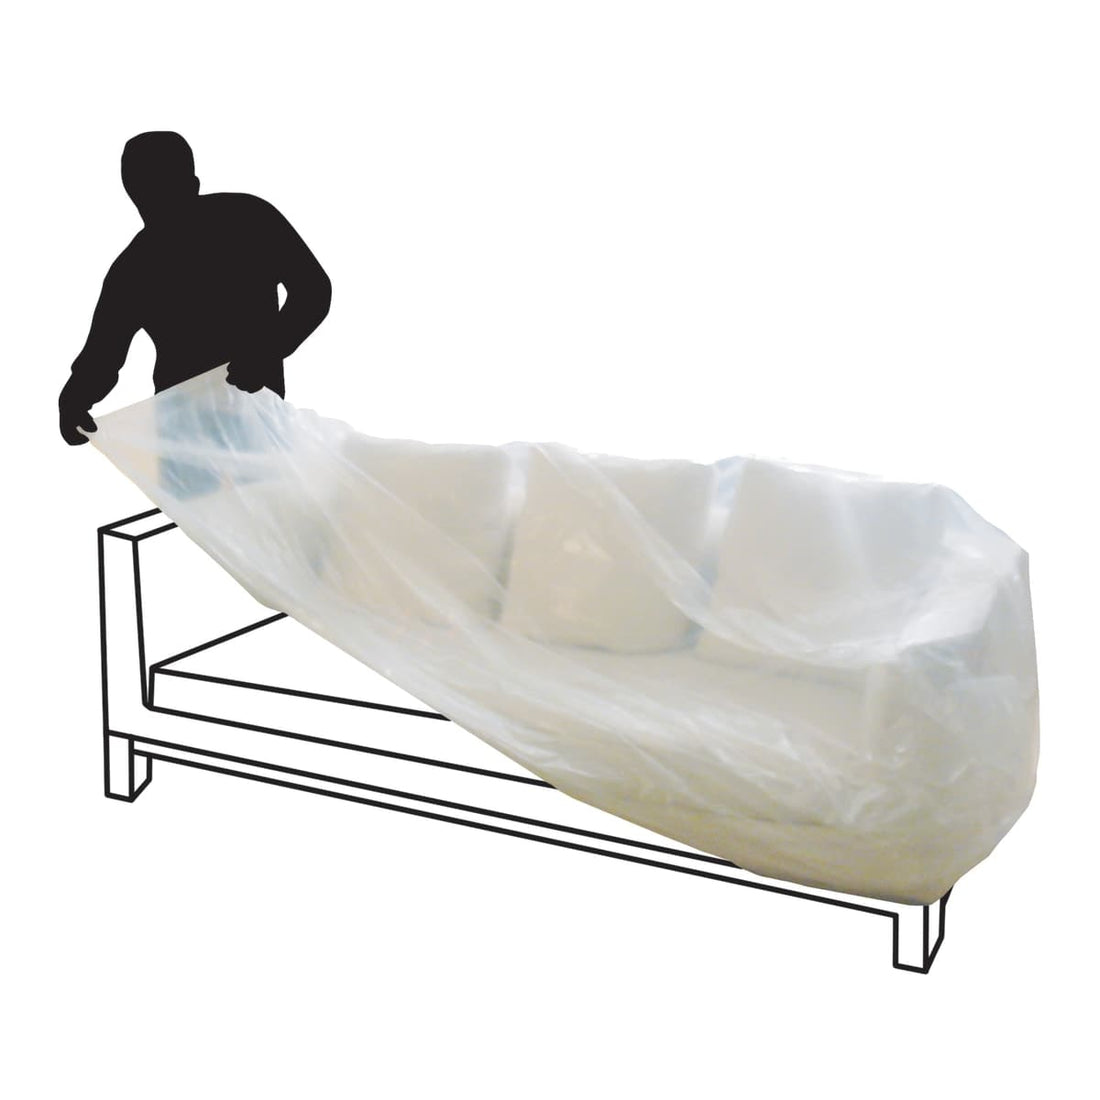 protective cover for 2 seater sofa w300xd150cm in transparent polypropylene - best price from Maltashopper.com BR410002395